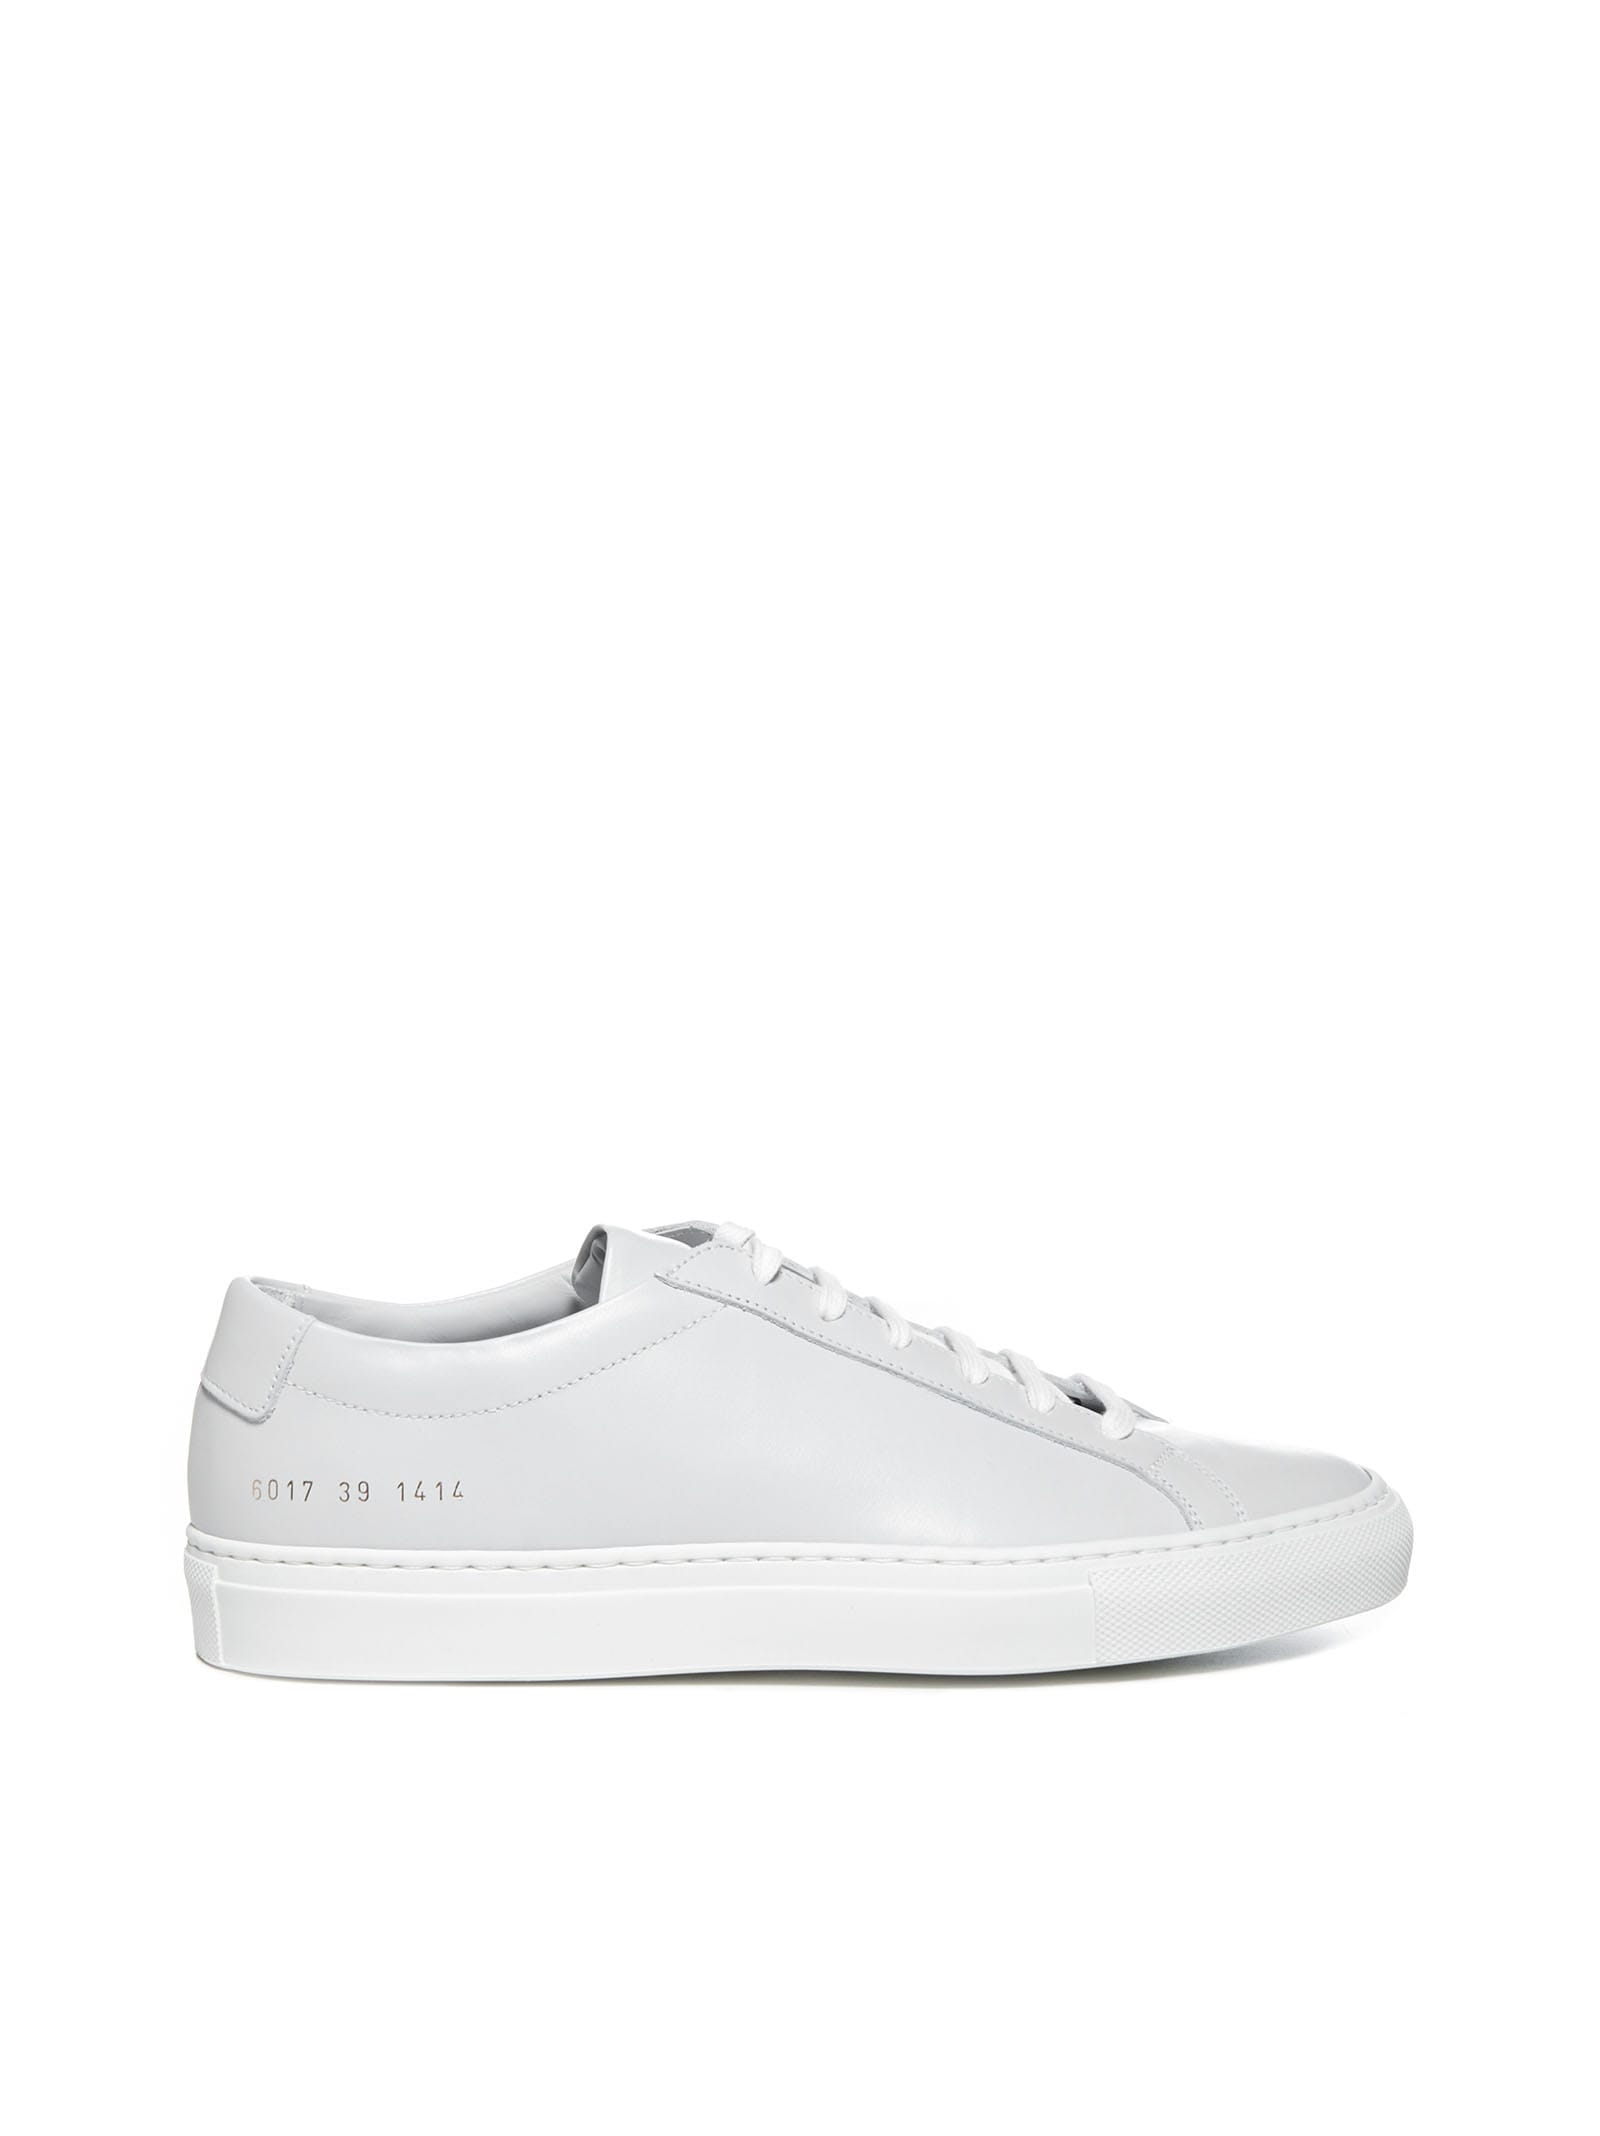 COMMON PROJECTS ACHILLES LOW WHITE SOLE SNEAKERS,11287412